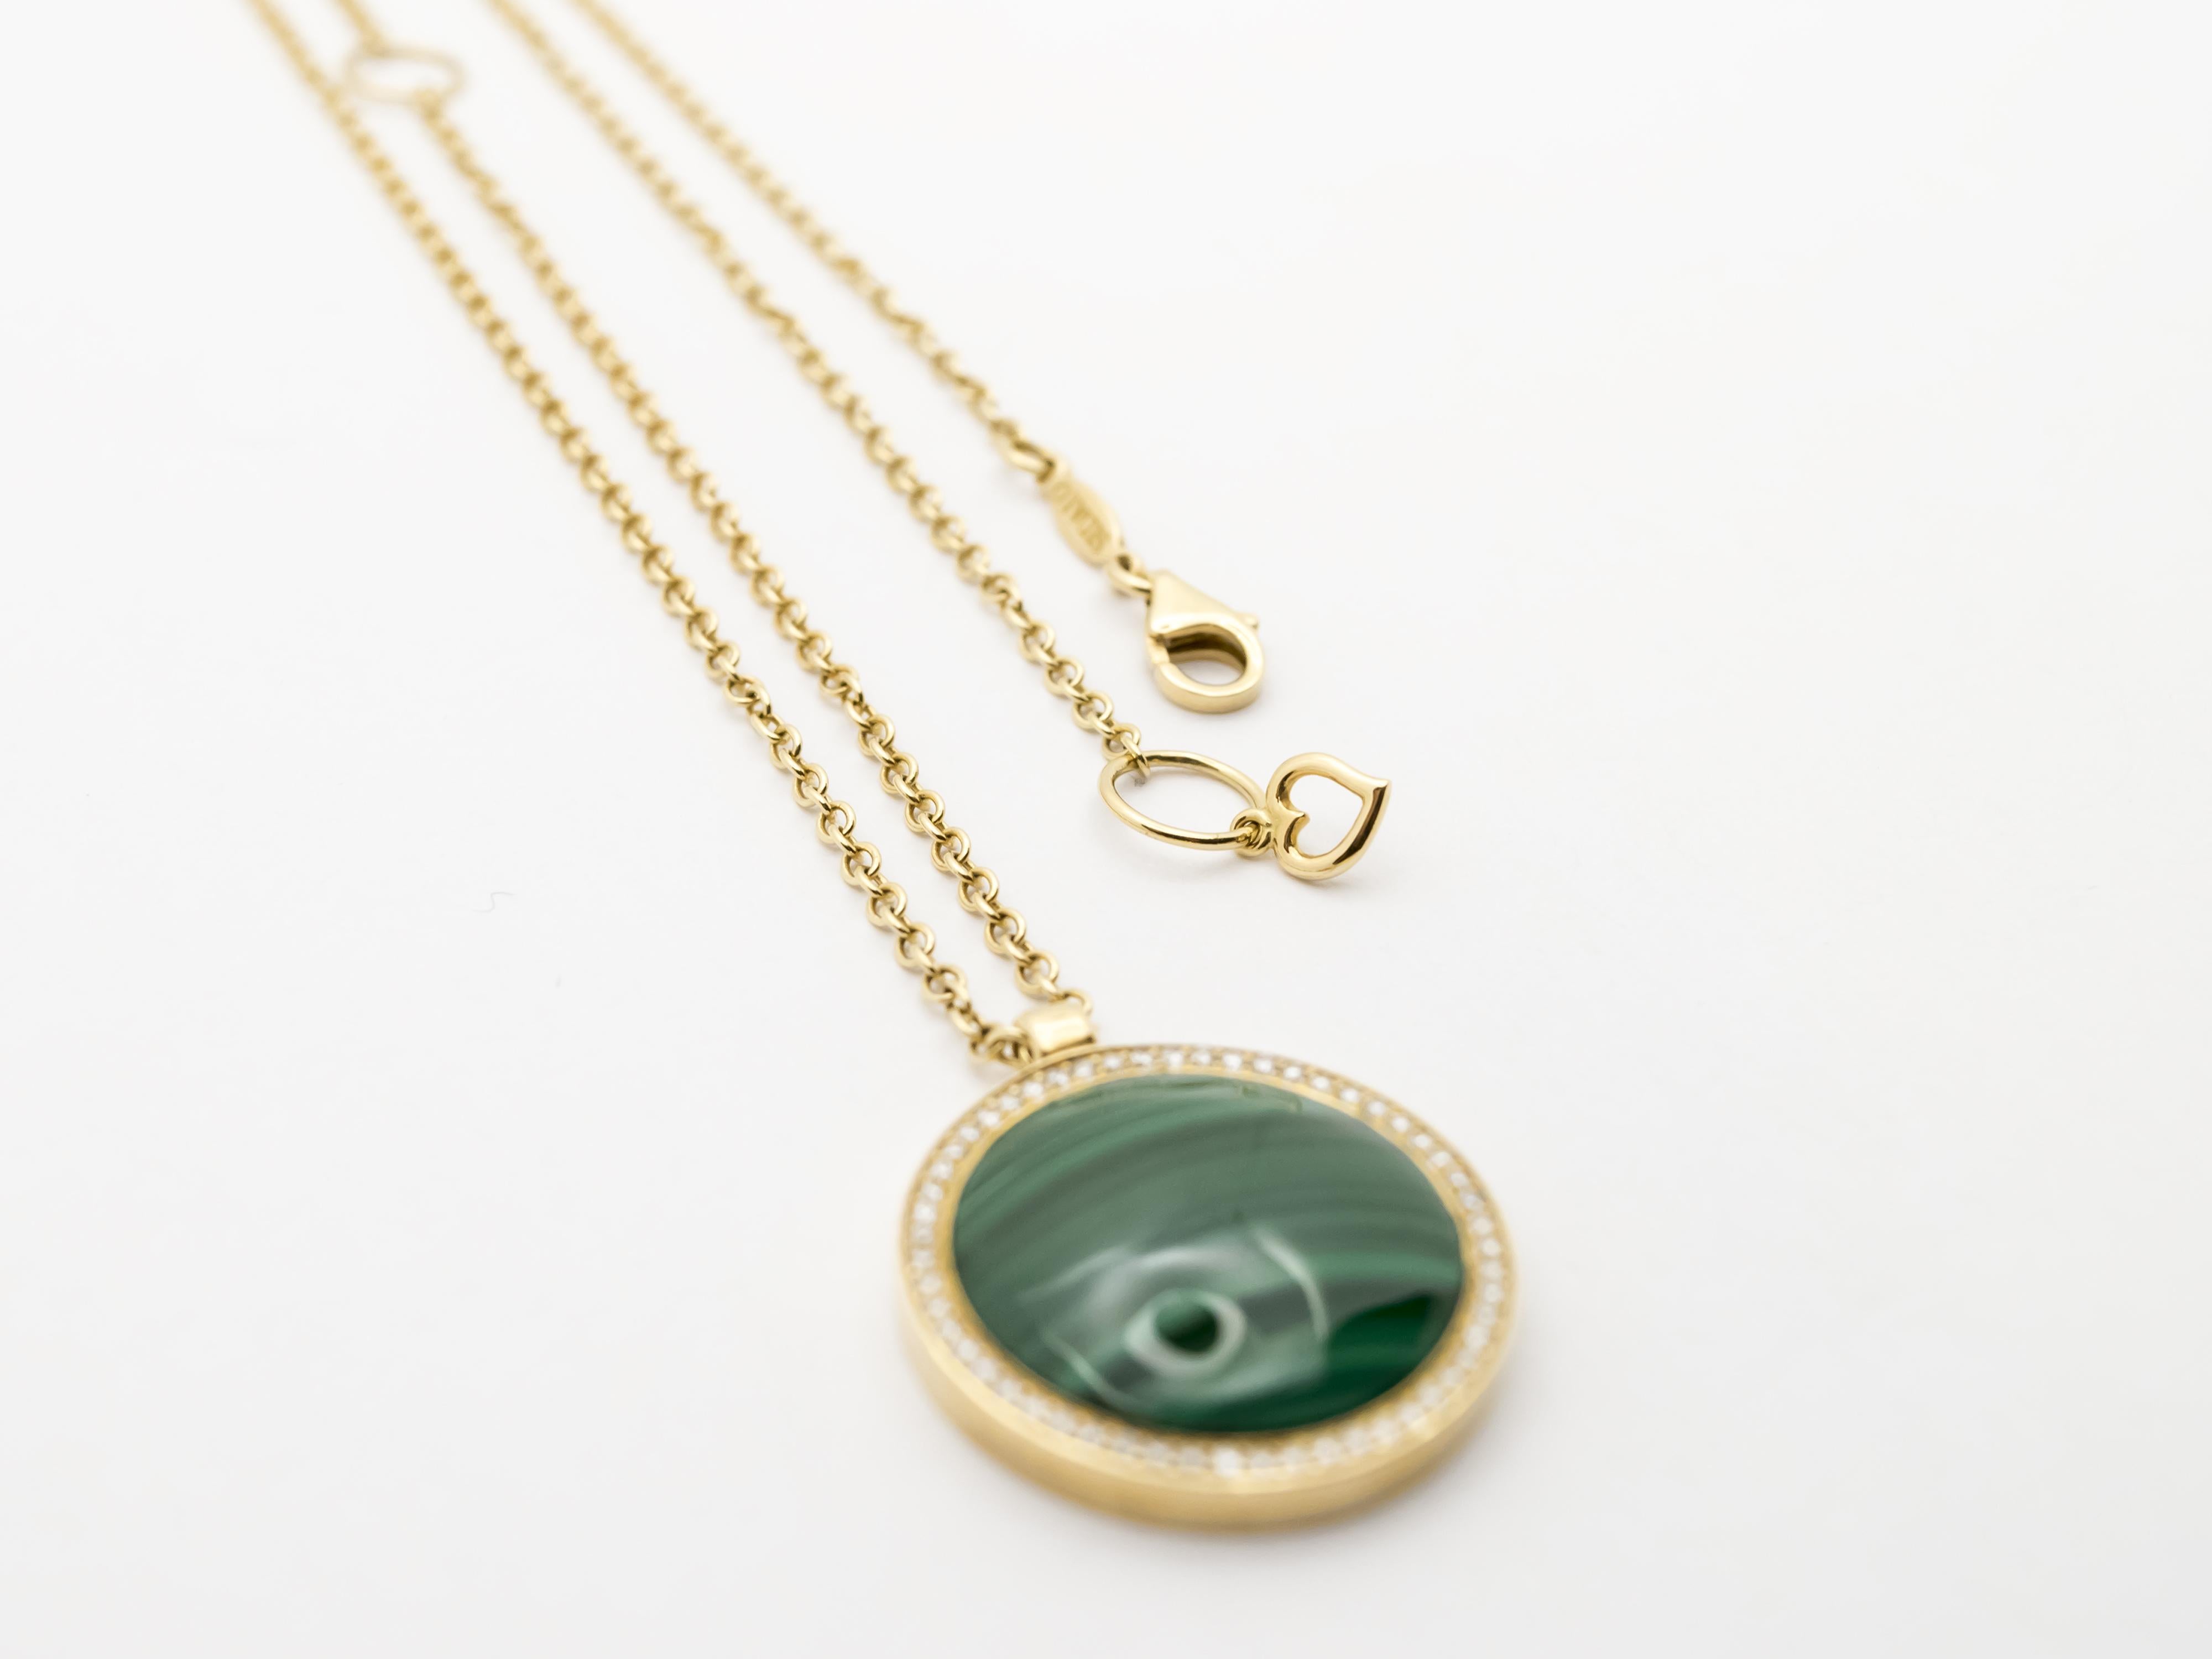 Contemporary Yellow Gold Necklace with Malachite and Diamond Pendant For Sale